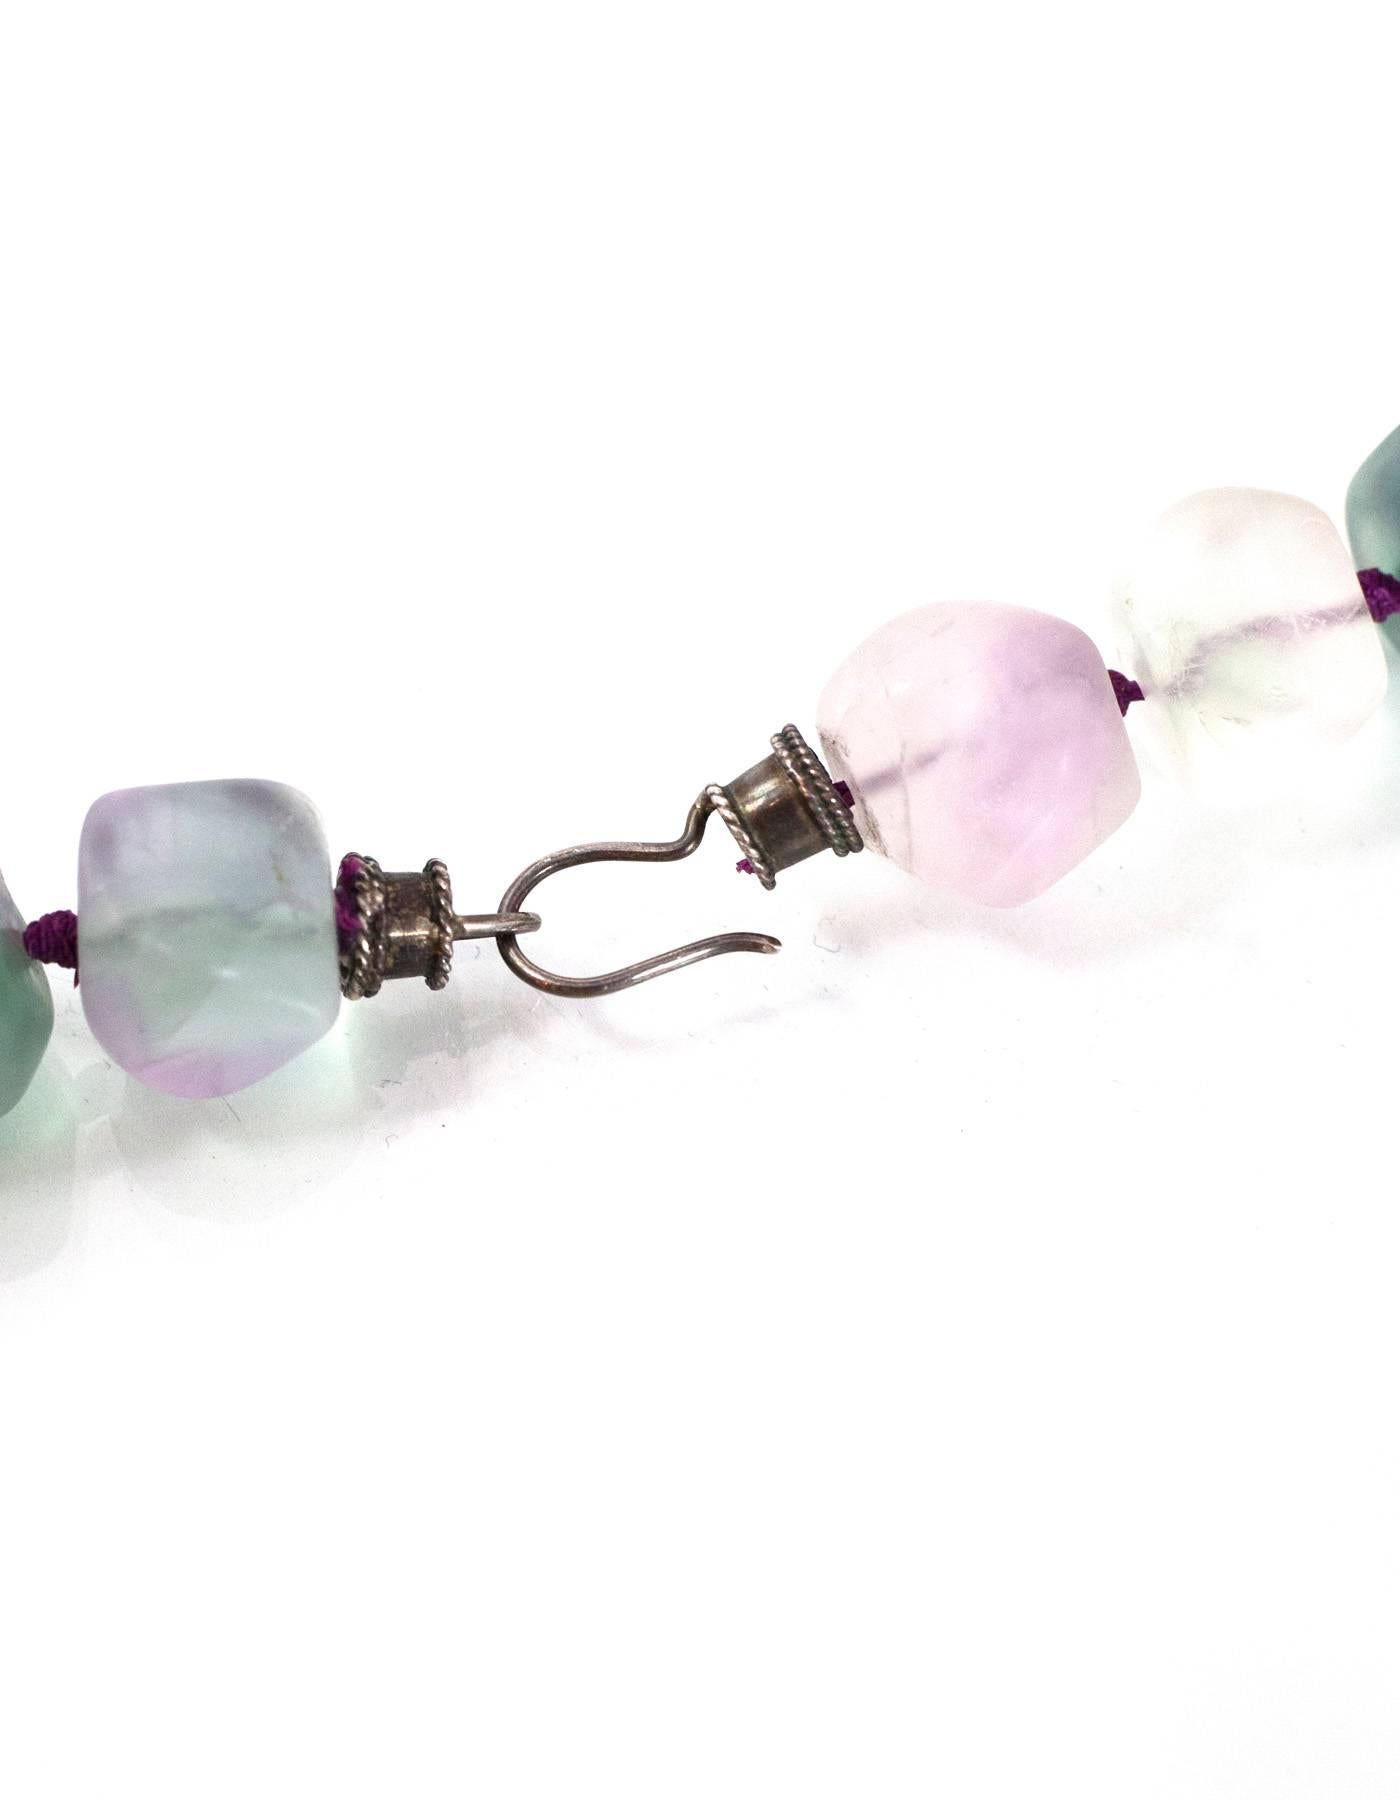 Green & Purple Semi-Precious Beaded Stone Collar Necklace 
Features purple knots between each stone
Color: Green, purple and clear
Materials: Semi-precious stones and metal
Closure: Hook and eye closure
Overall Condition: Excellent pre-owned